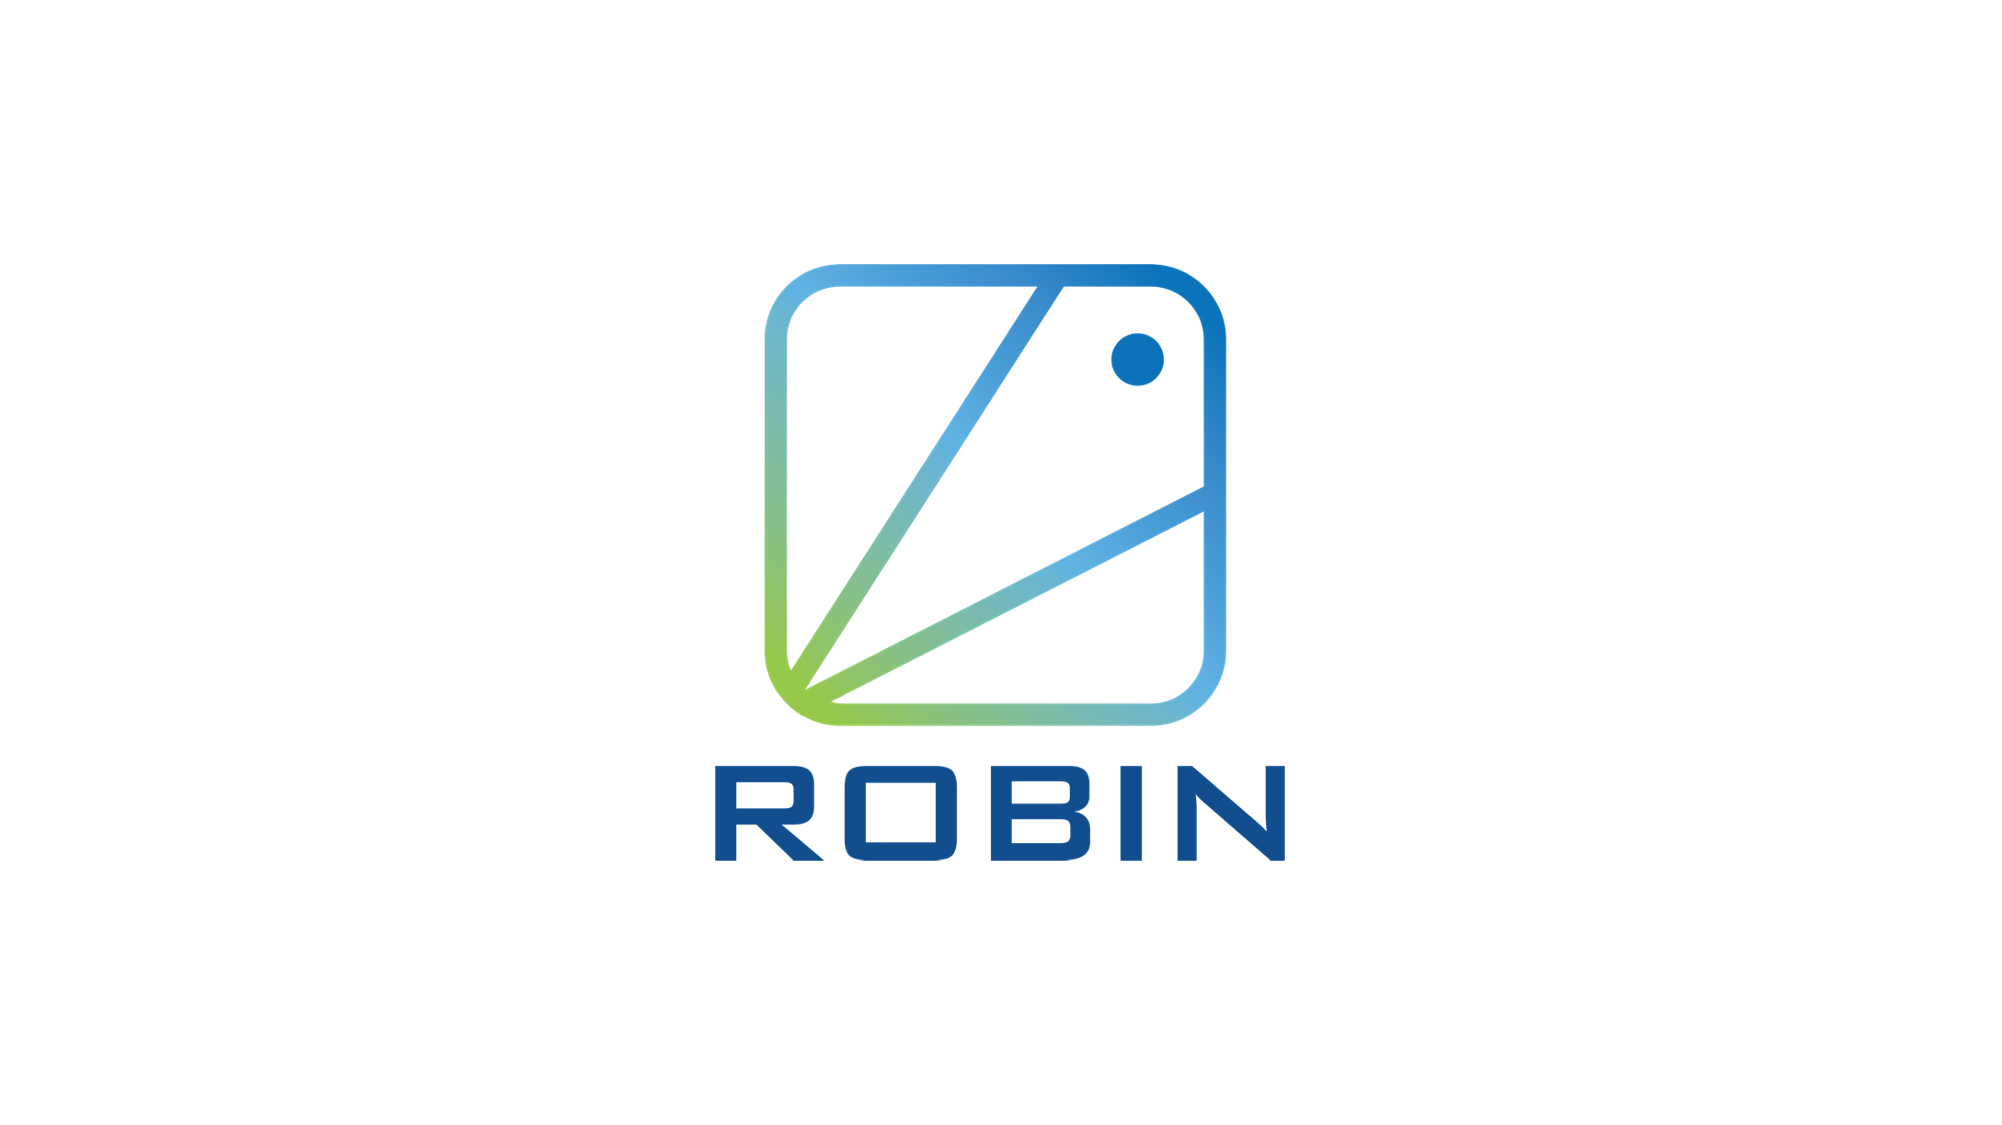 Robin.io and AirHop Announce Strategic Partnership to Modernize Open RAN Solutions for 4G/5G Networks